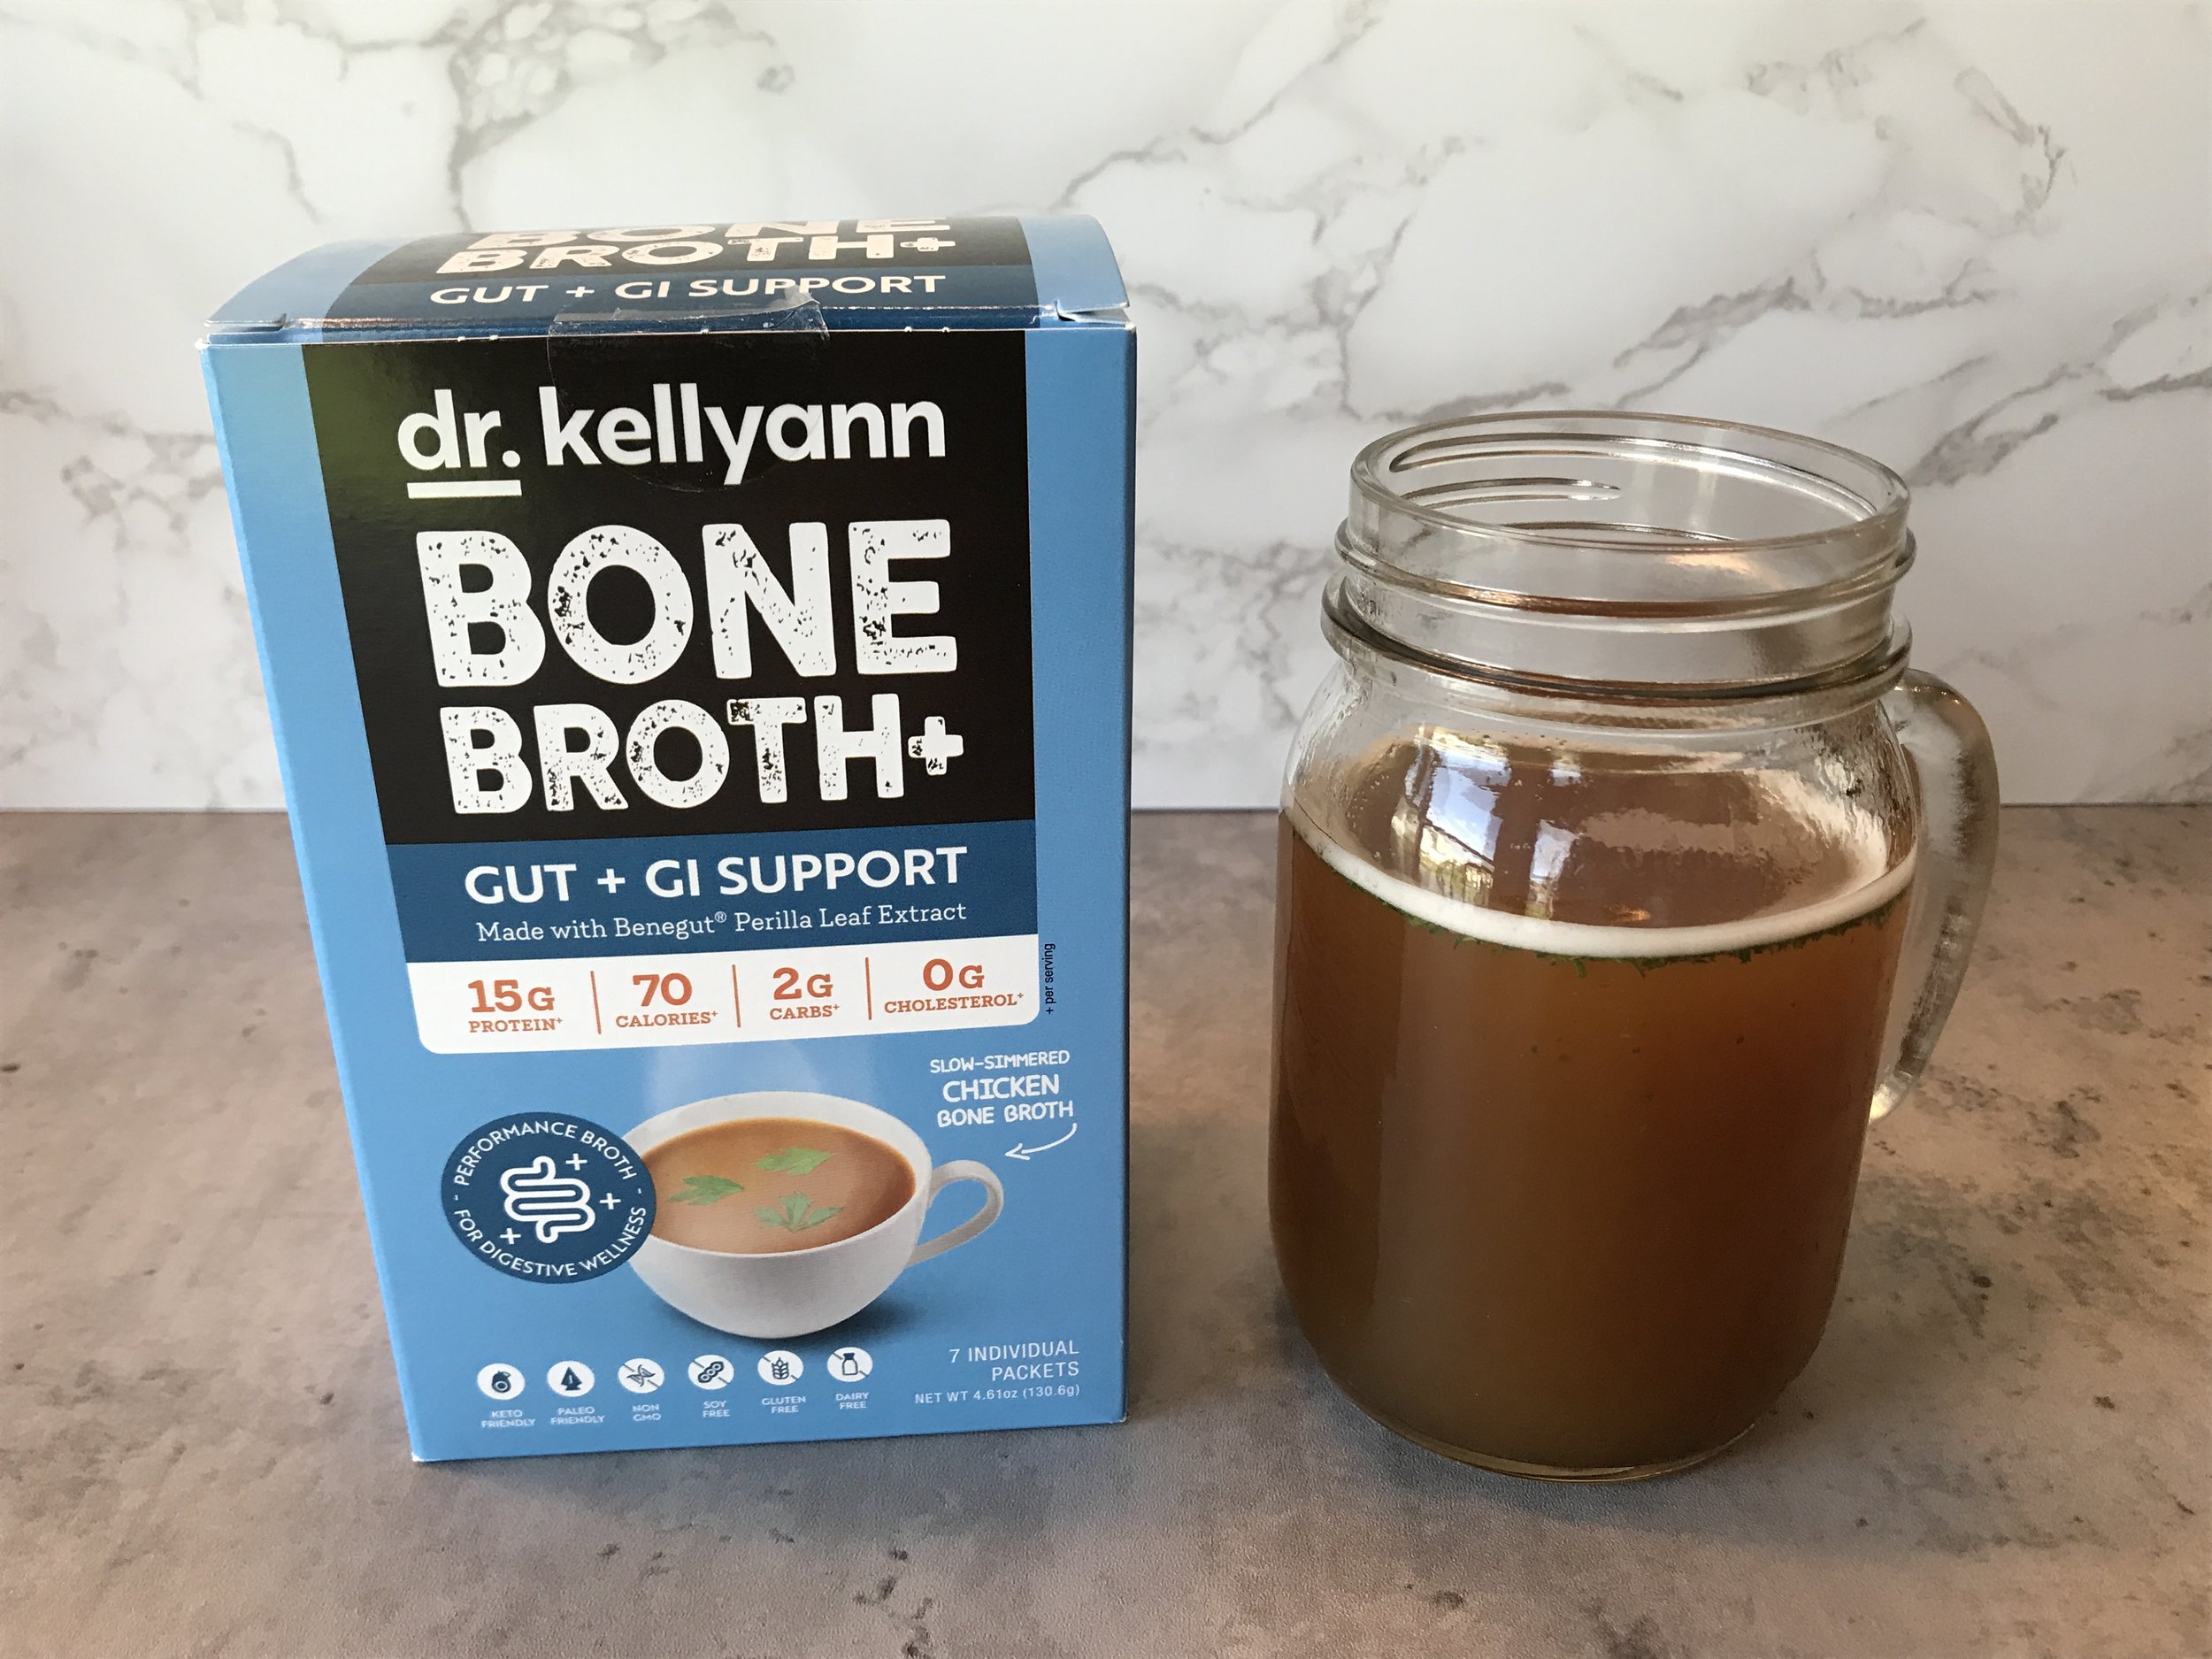 My Review of Dr. Kellyann's Bone Broth+ Gut + GI Support — The Keto